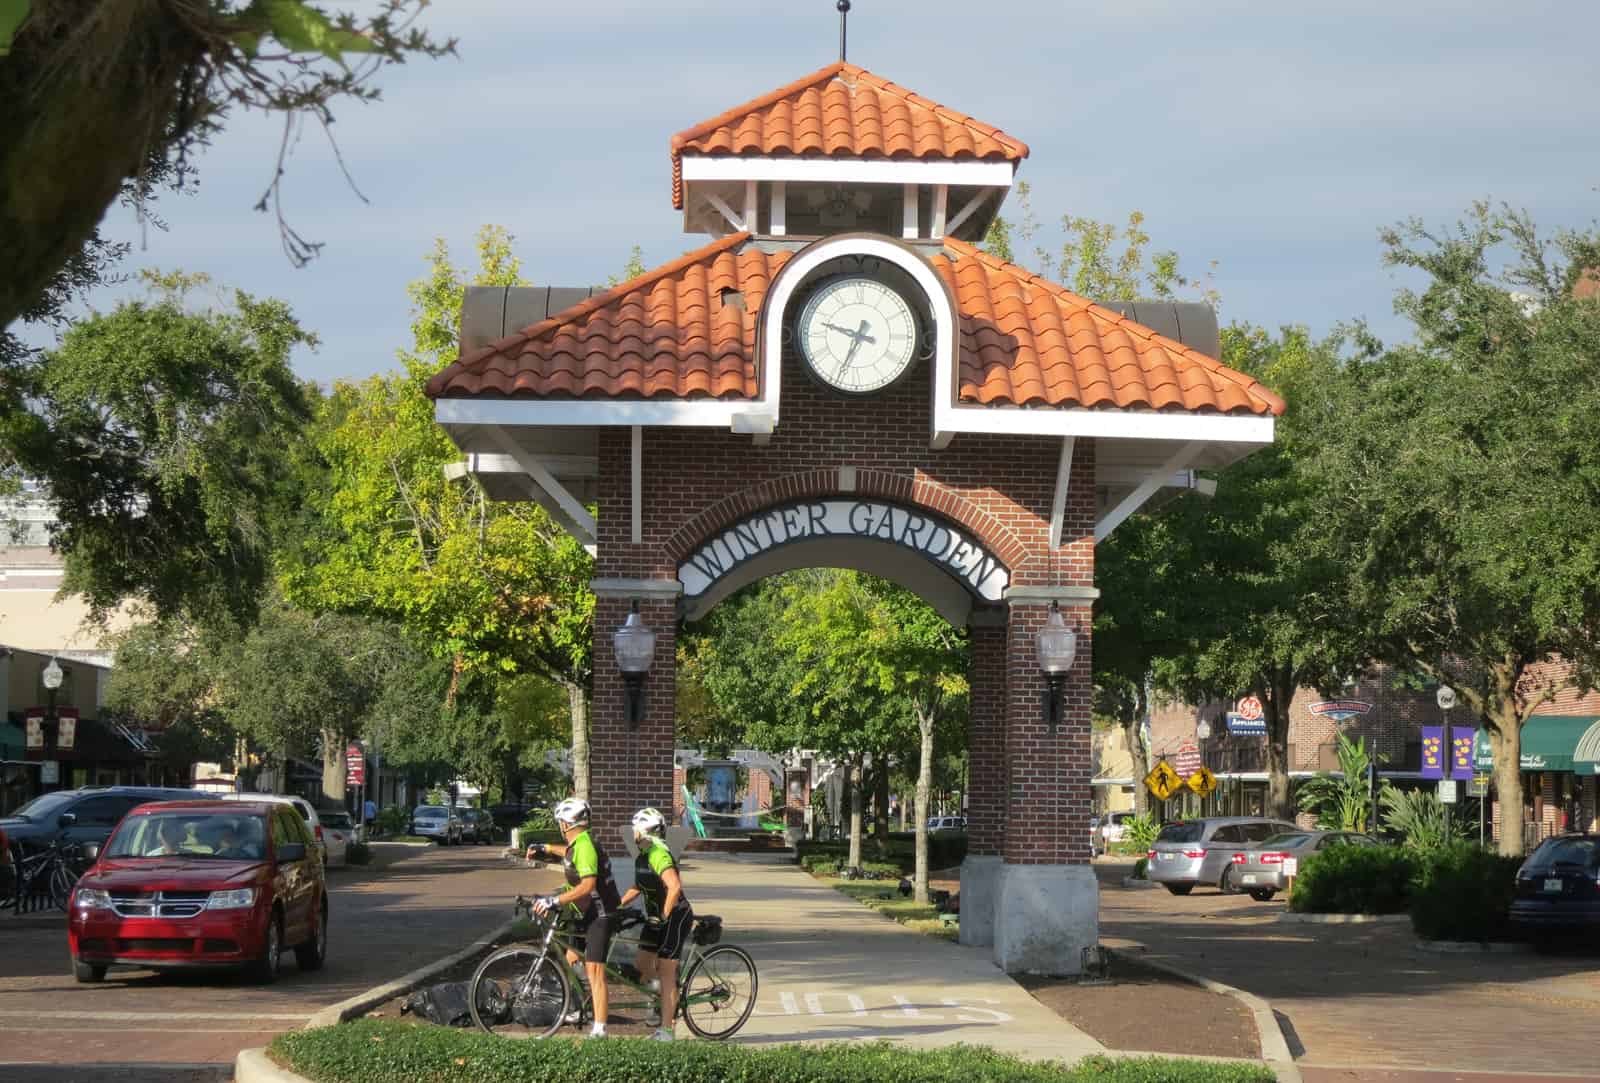 The West Orange Trail is one of Florida's best bike trails. It passes through charming Winter Garden and other small towns in Central Florida. (Photo: Bonnie Gross)